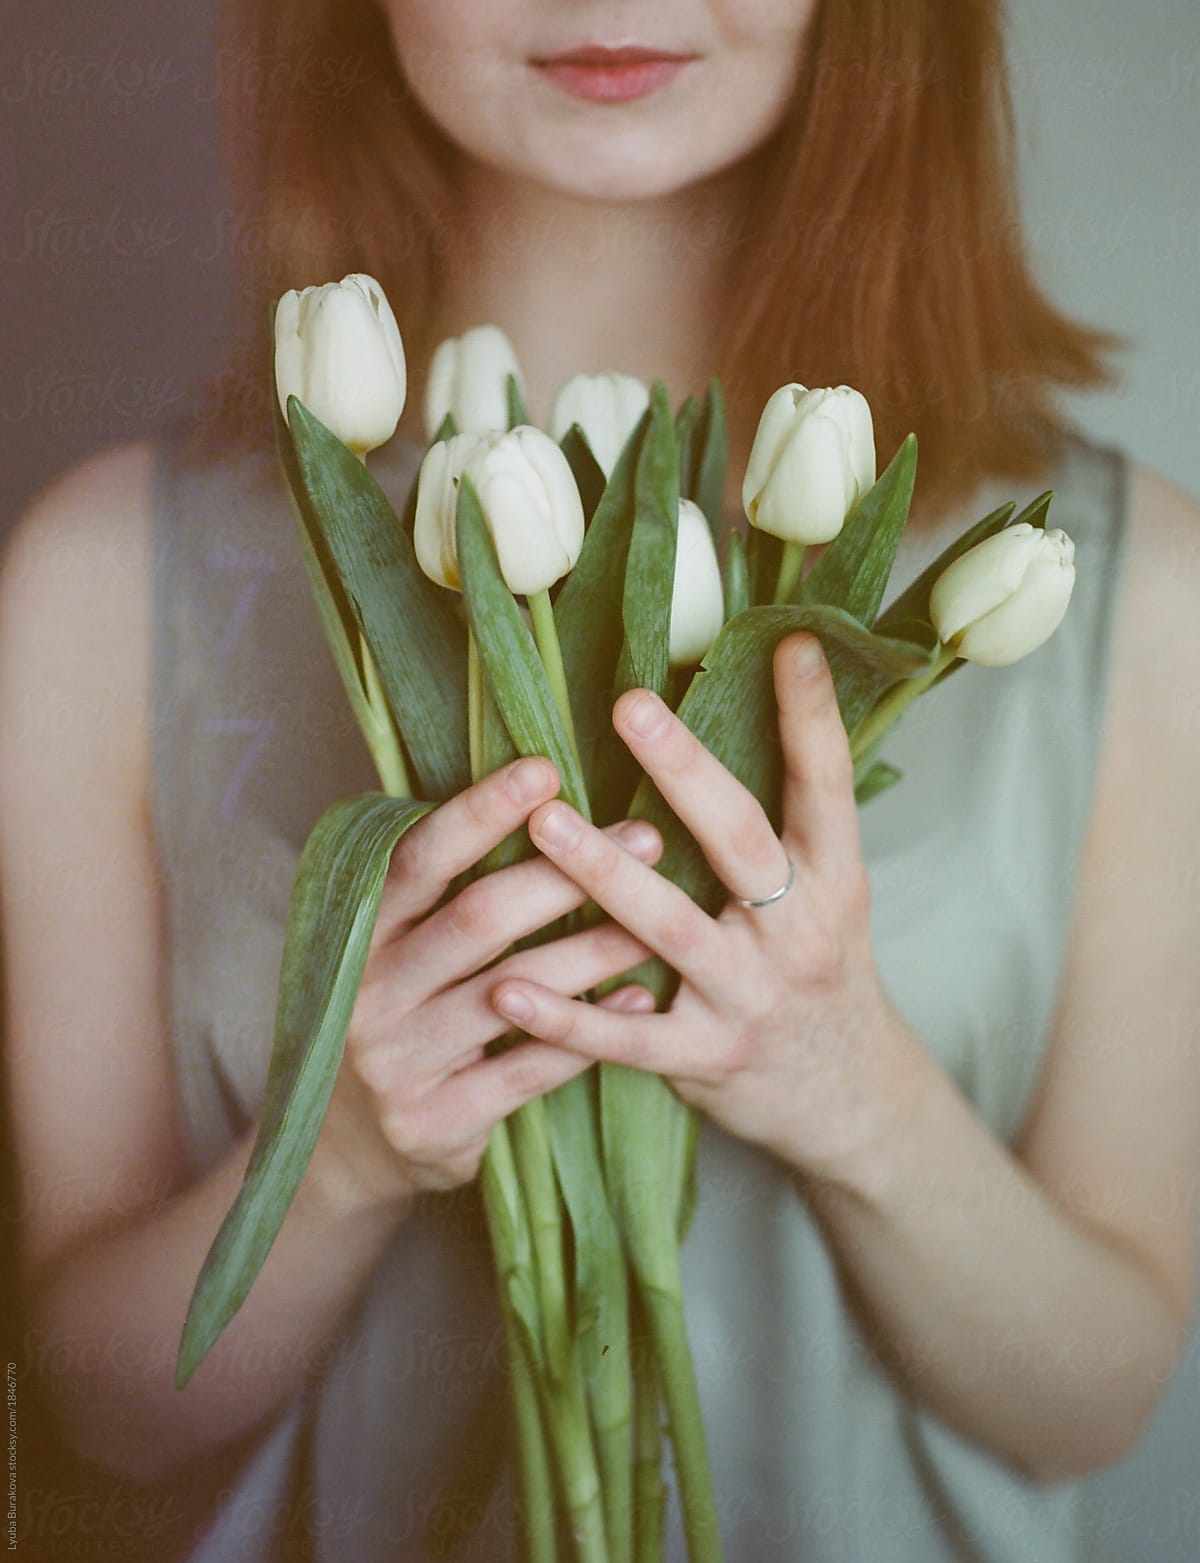 Woman holding banch of white tulips